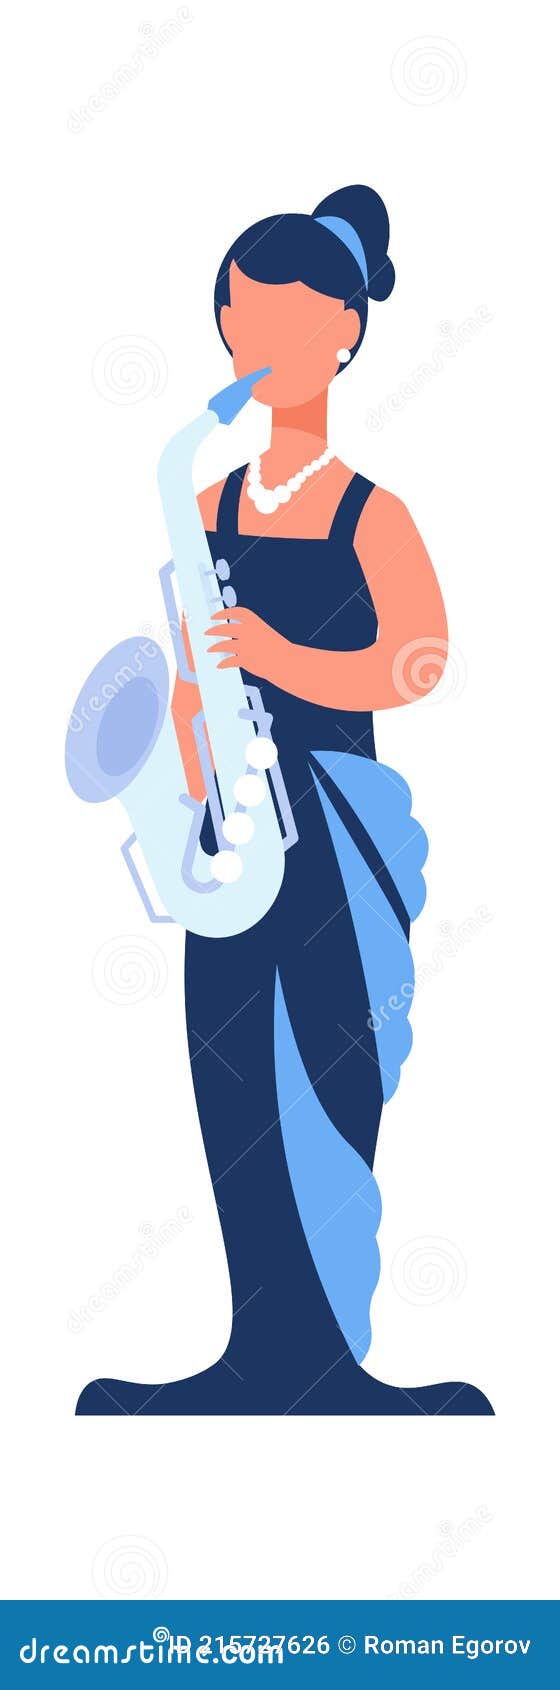 cartoon musician. woman with saxophone. female playing music. cute character holding musical instrument. symphonic